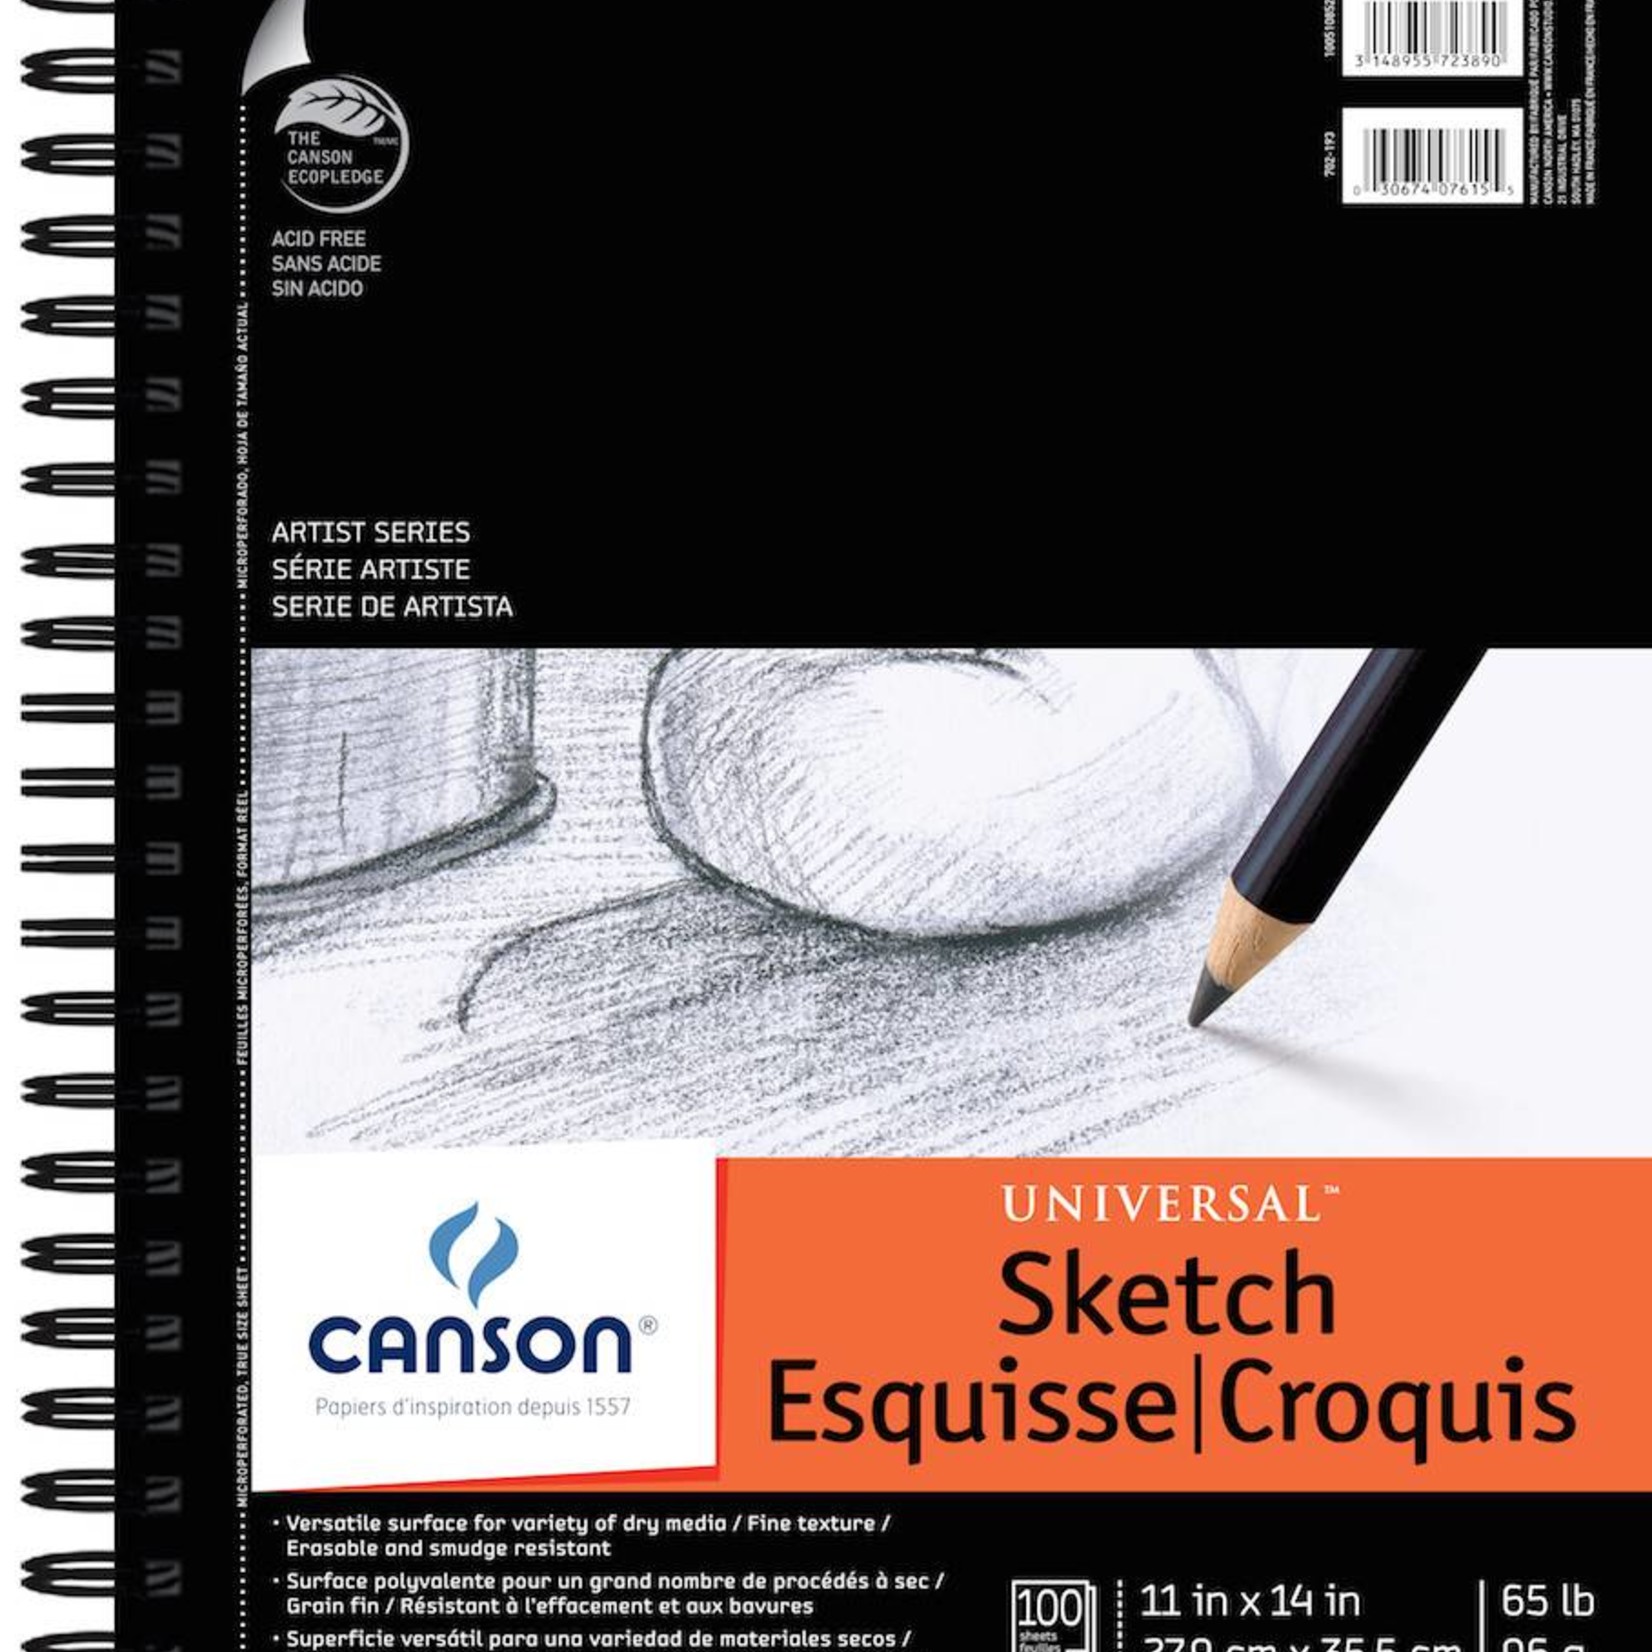 CANSON CANSON ARTIST SERIES UNIVERSAL SKETCH